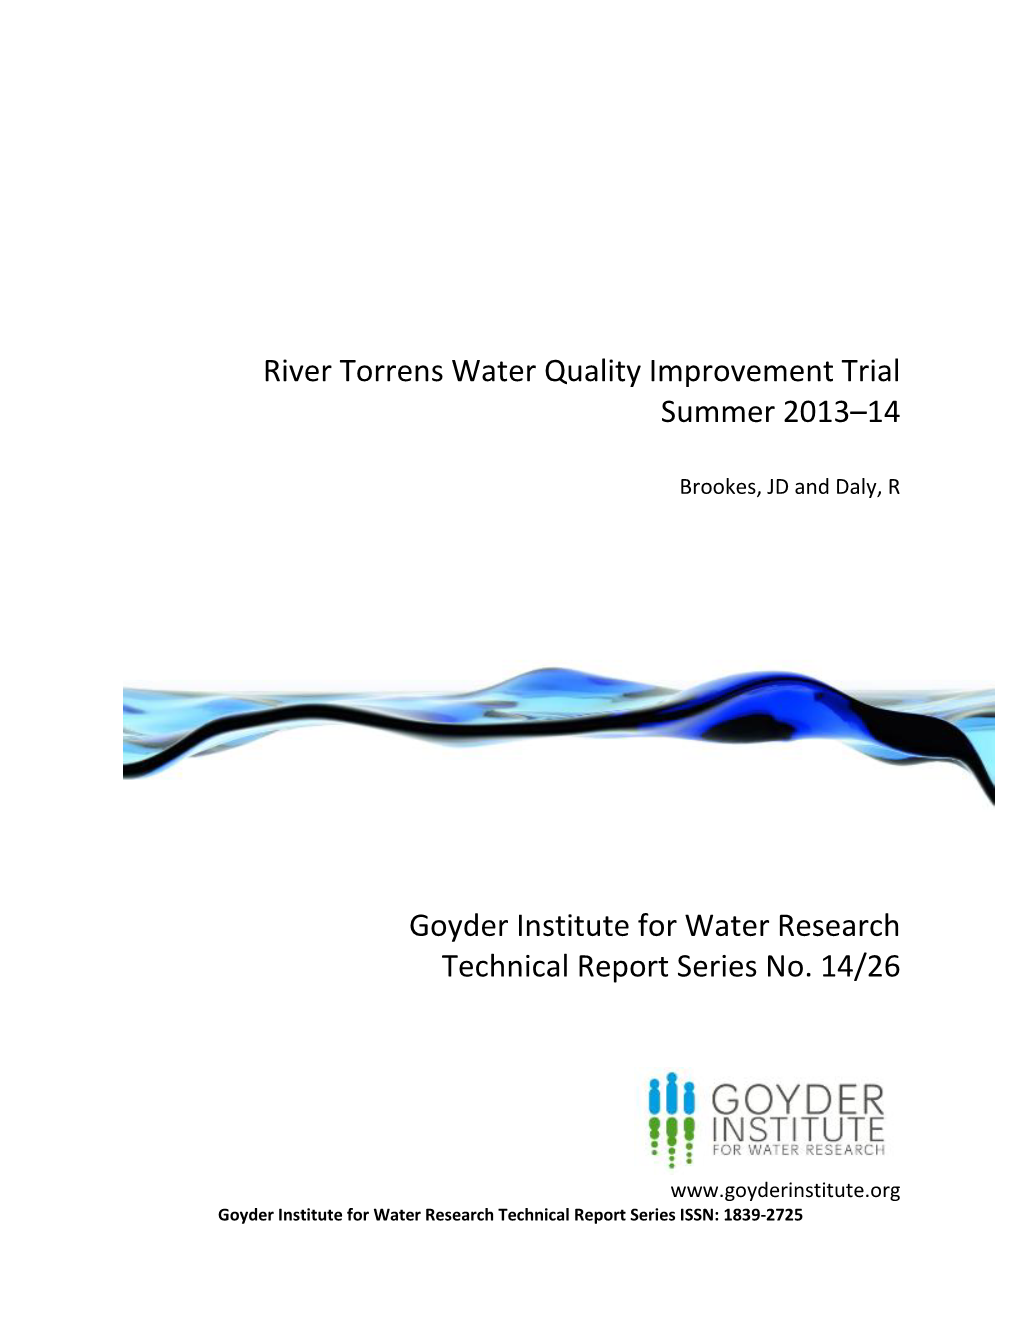 River Torrens Water Quality Improvement Trial Summer 2013–14